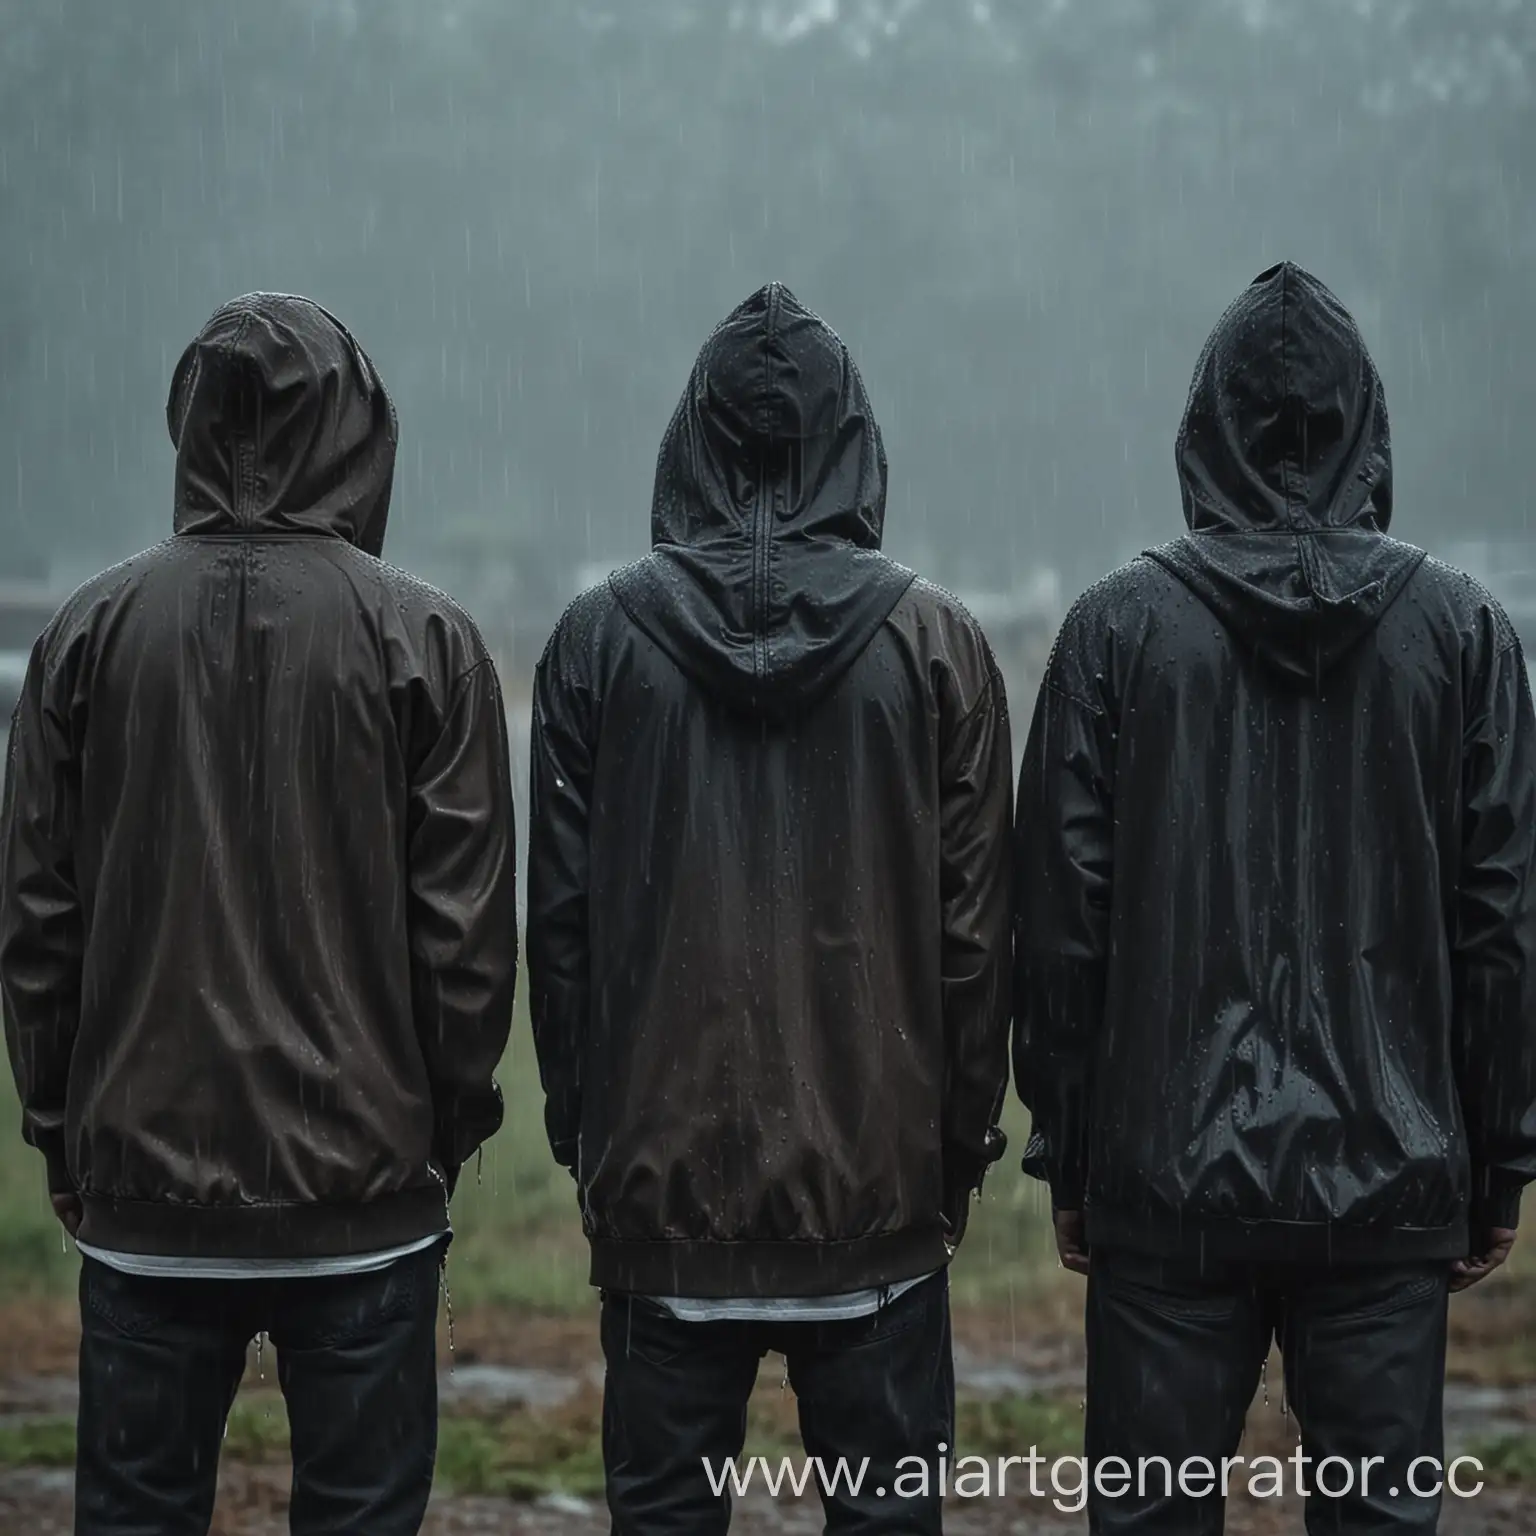 Three men in hoodies stand with their backs to the rain